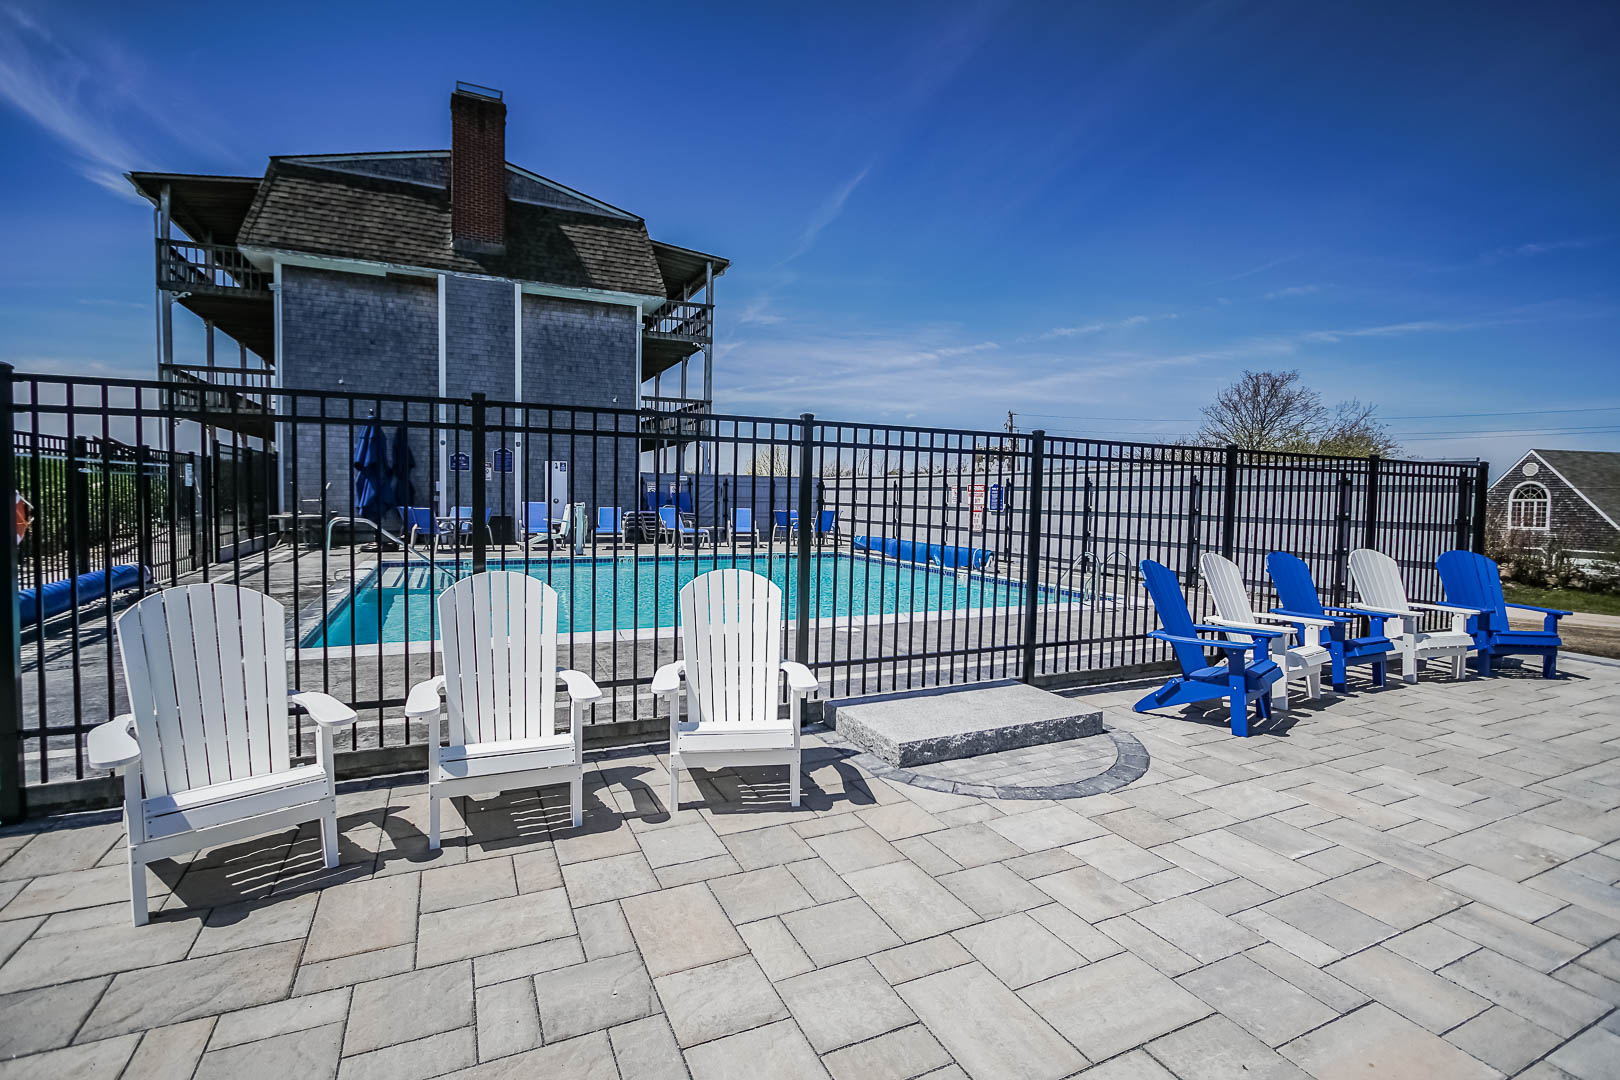 A spacious swimming pool area at VRI's Neptune House Resort in Rhode Island.